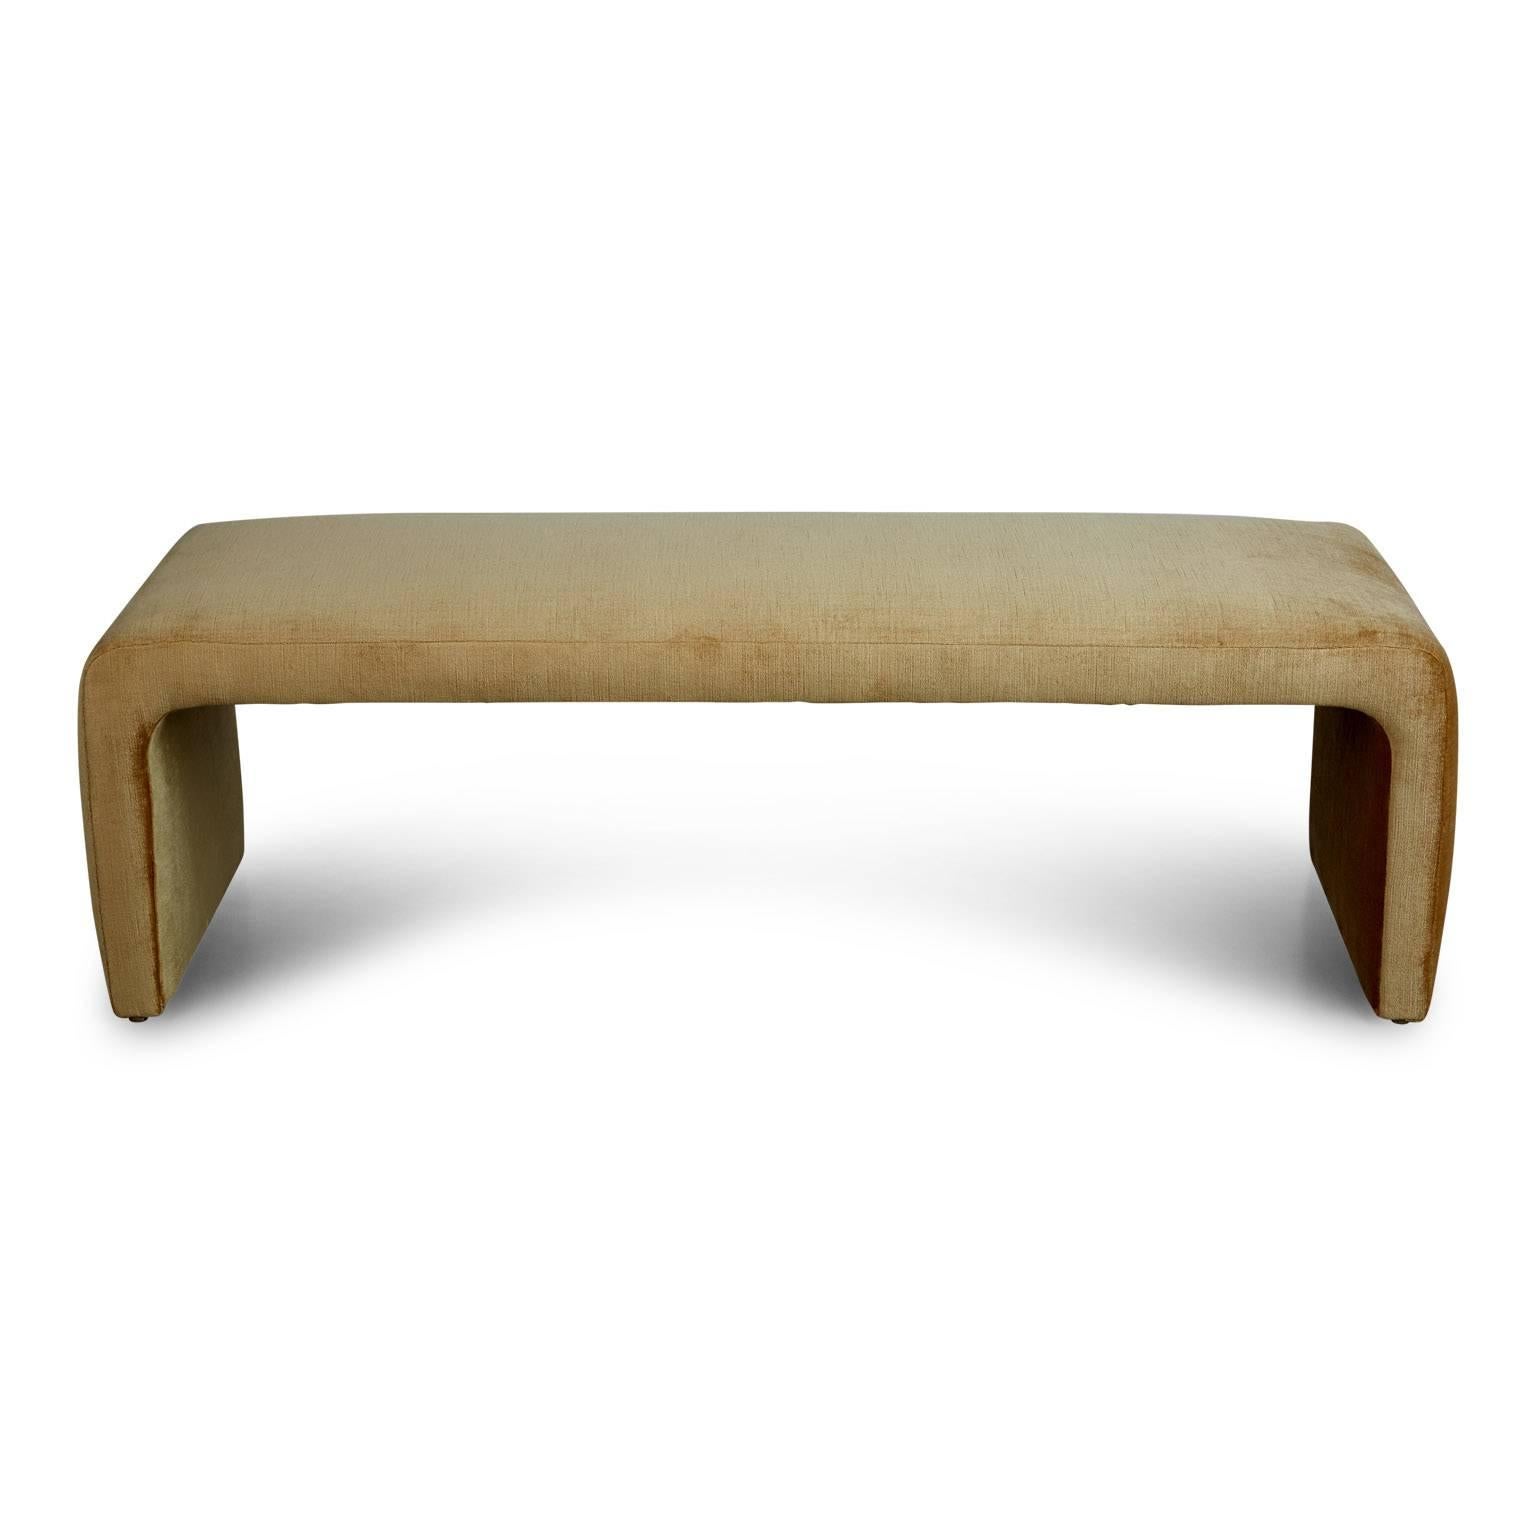 Late 20th Century Modern Waterfall Benches Newly Upholstered in Schumacher Gold Velvet